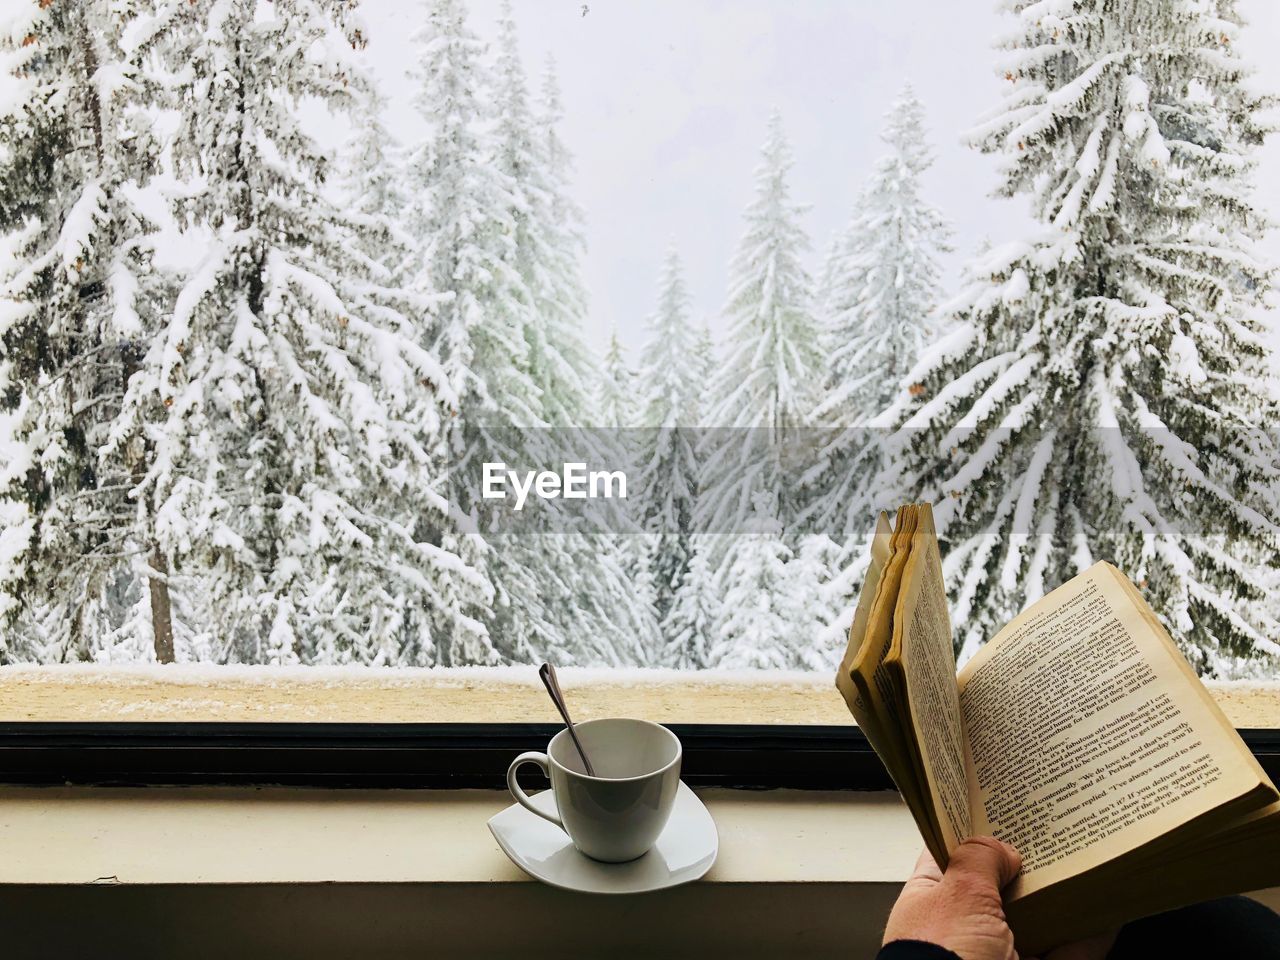 Hand holding a book with a white cup placed on plate near a window through which you can see  forest